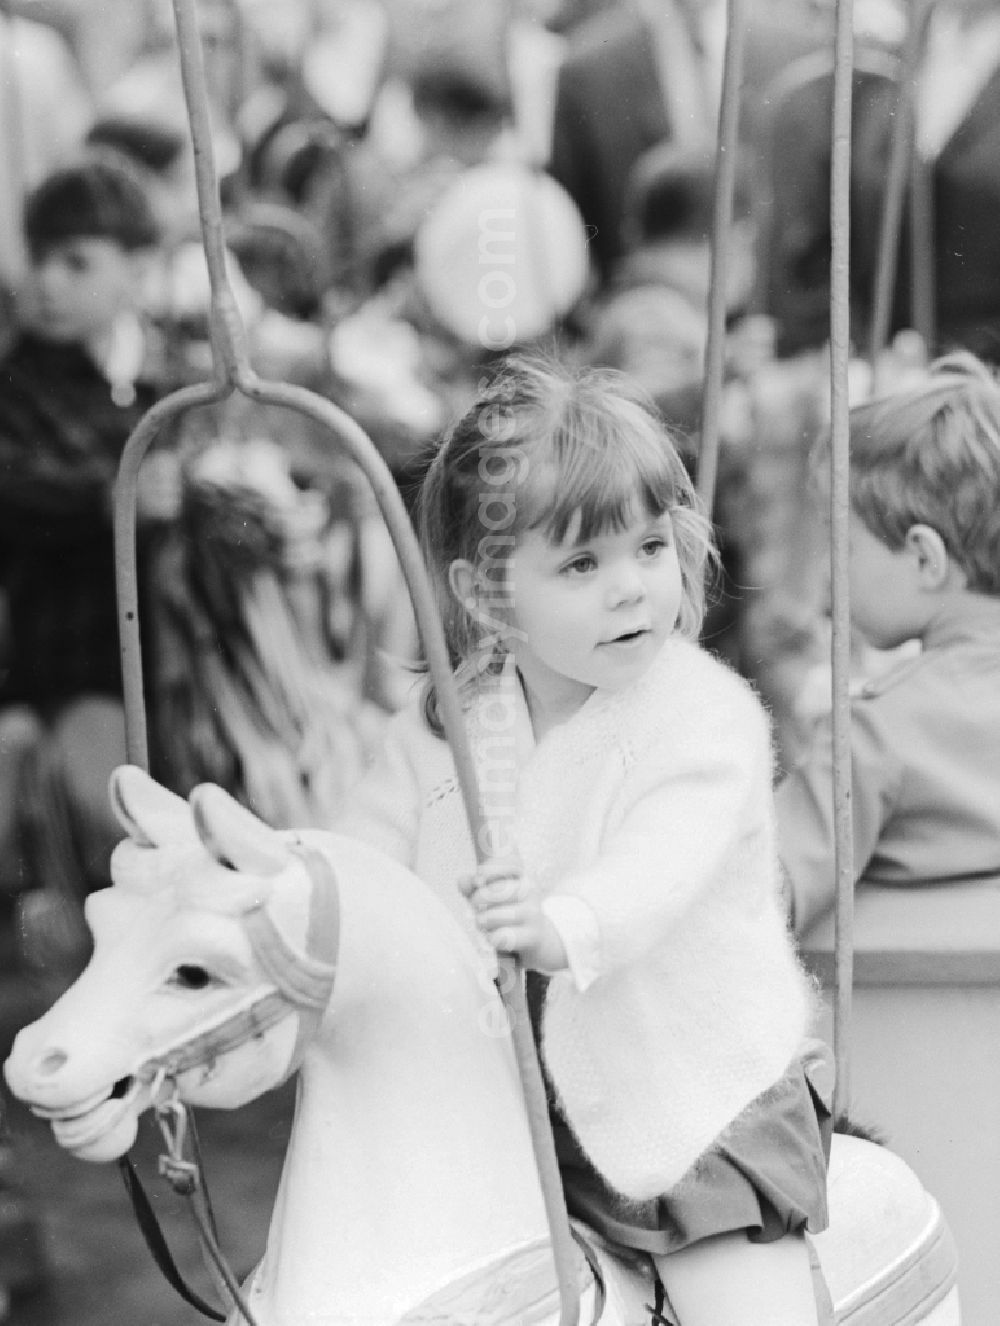 Berlin: A little girl on a carousel horse in Berlin, the former capital of the GDR, the German Democratic Republic